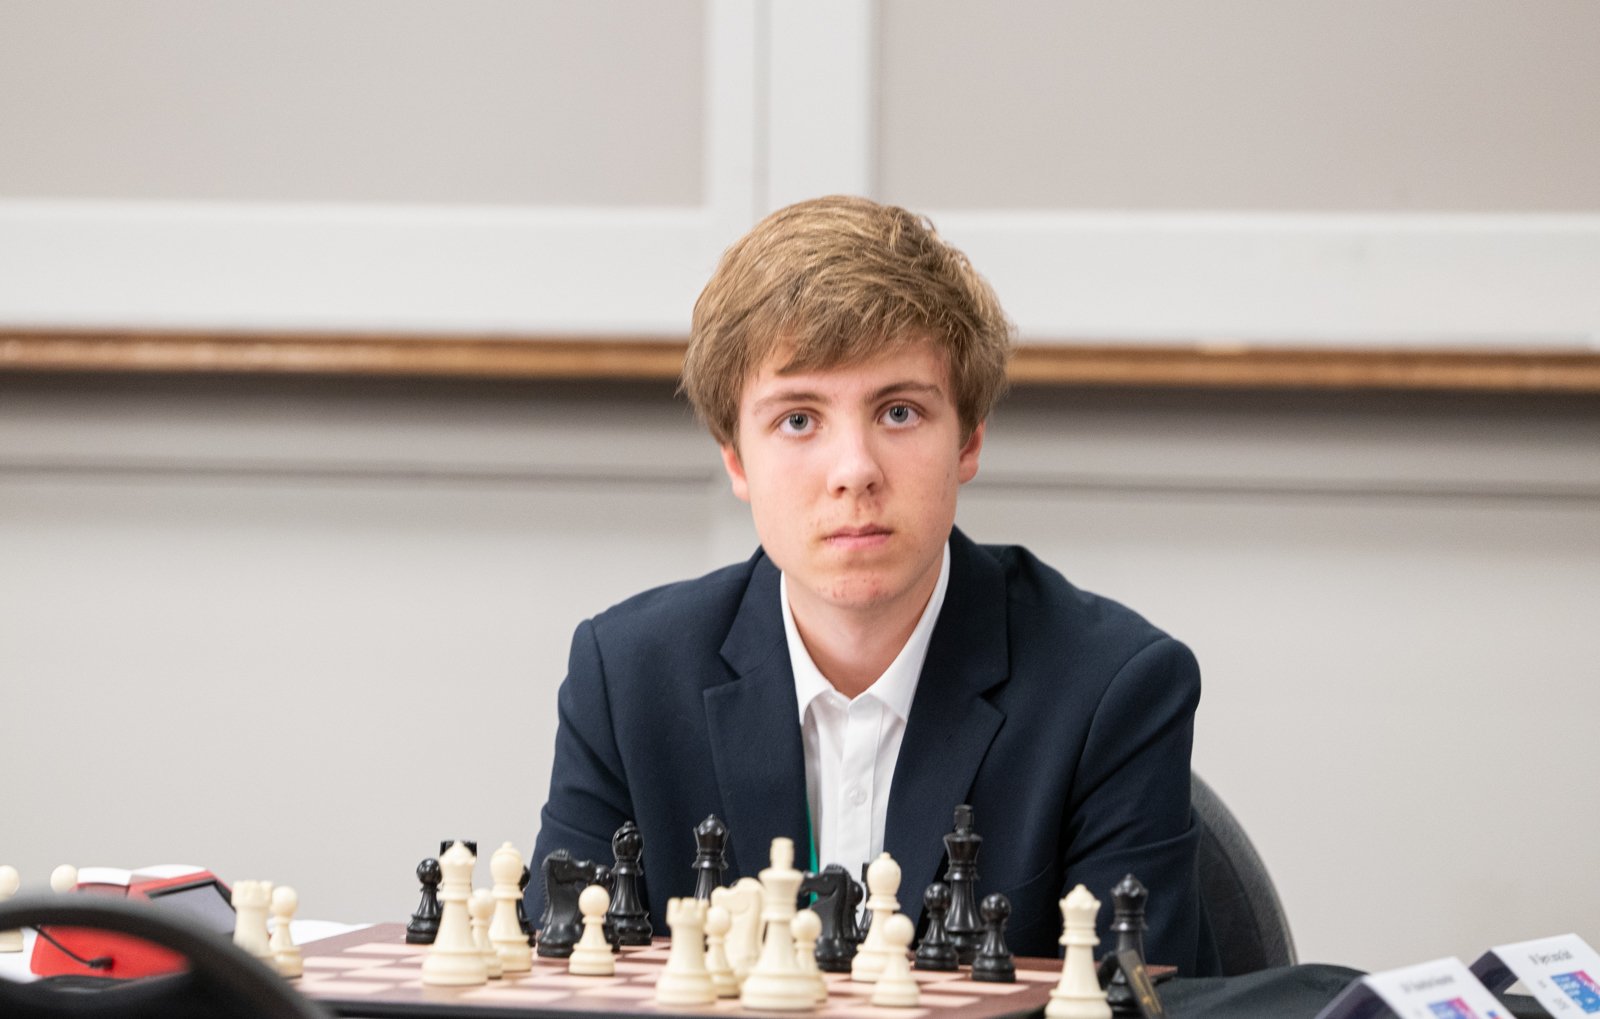 chess24 - And congratulations to 15-year-old Jonas Buhl